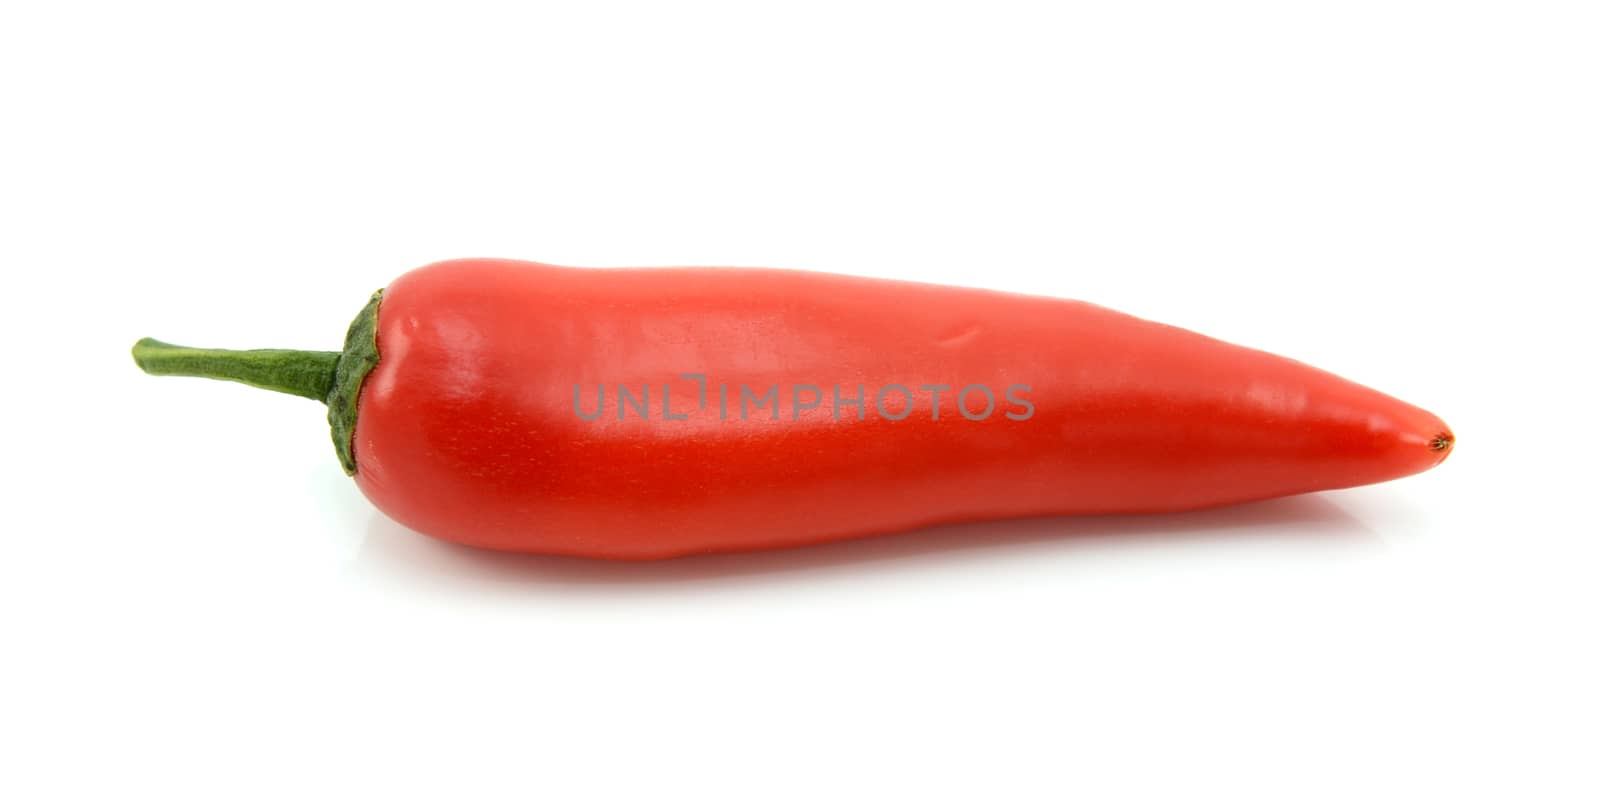 Single baby red pepper, isolated on a white background